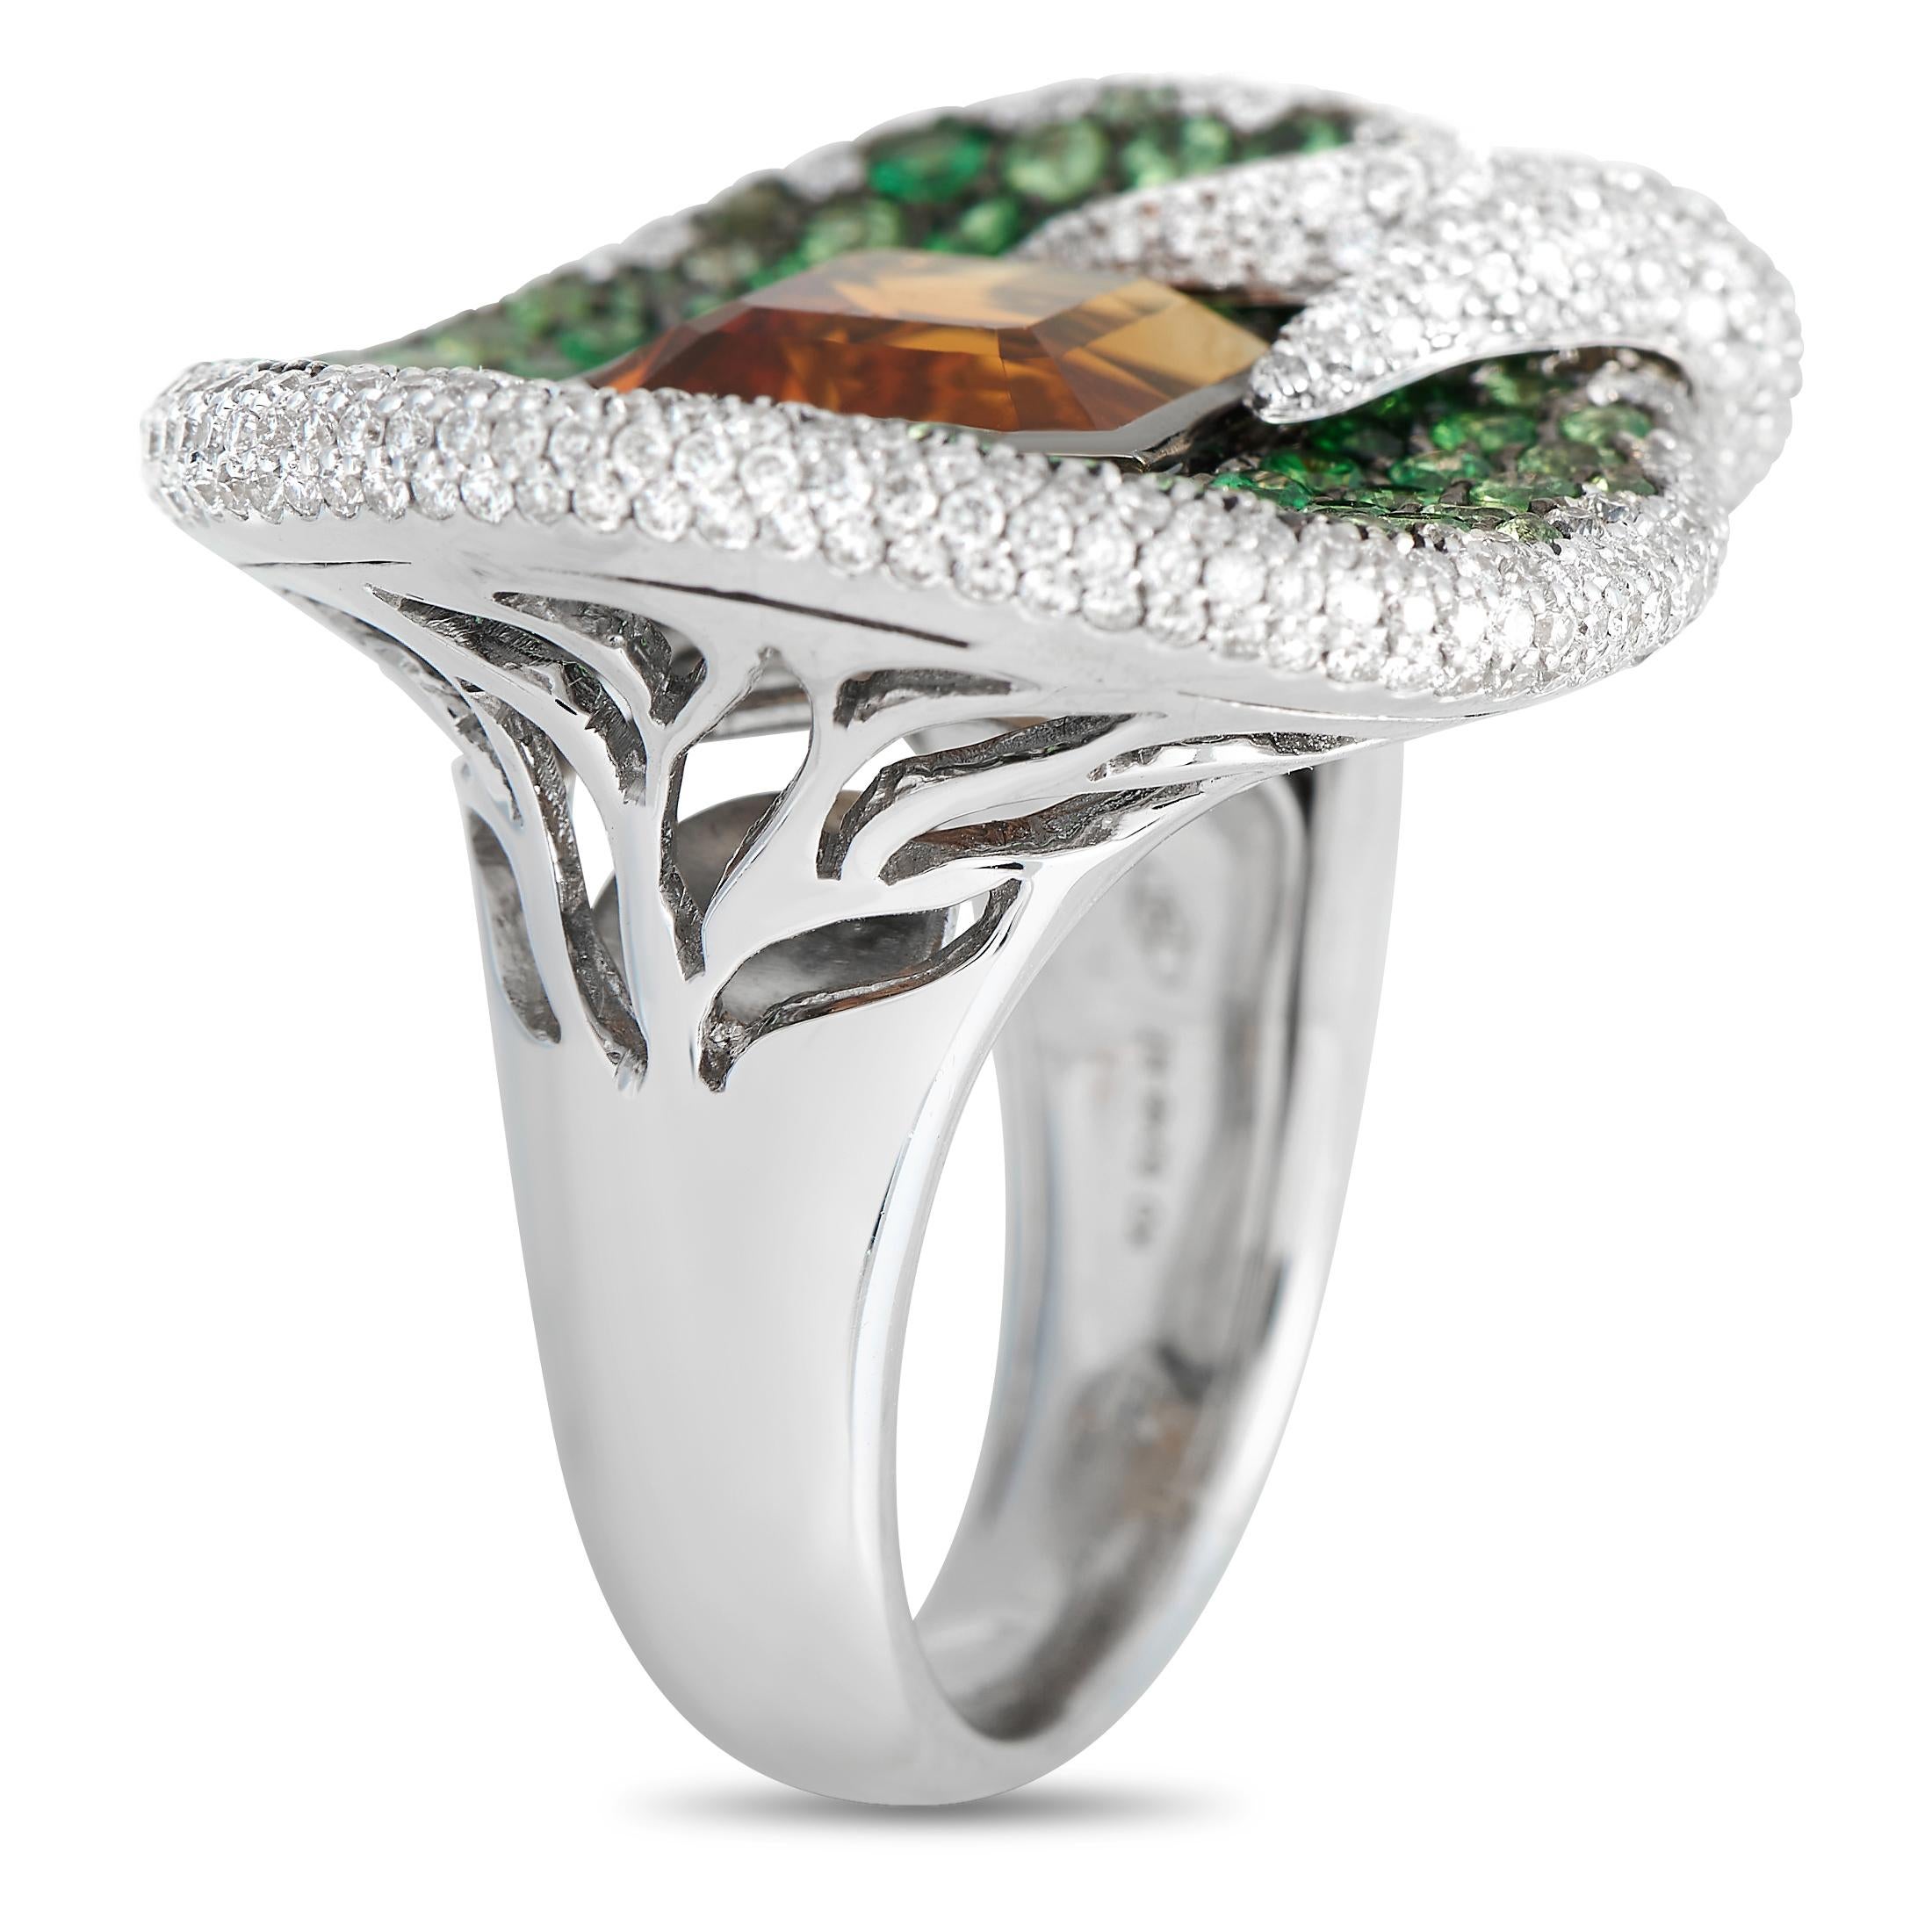 This ring from Maggioro's Rhapsody Collection is bright and beautiful. It is made of 18K white gold and boasts a design that features an 21.09 carat orange citrine stone accented with 3.09 carats of tsavorite. Lastly, the colored stones are accented